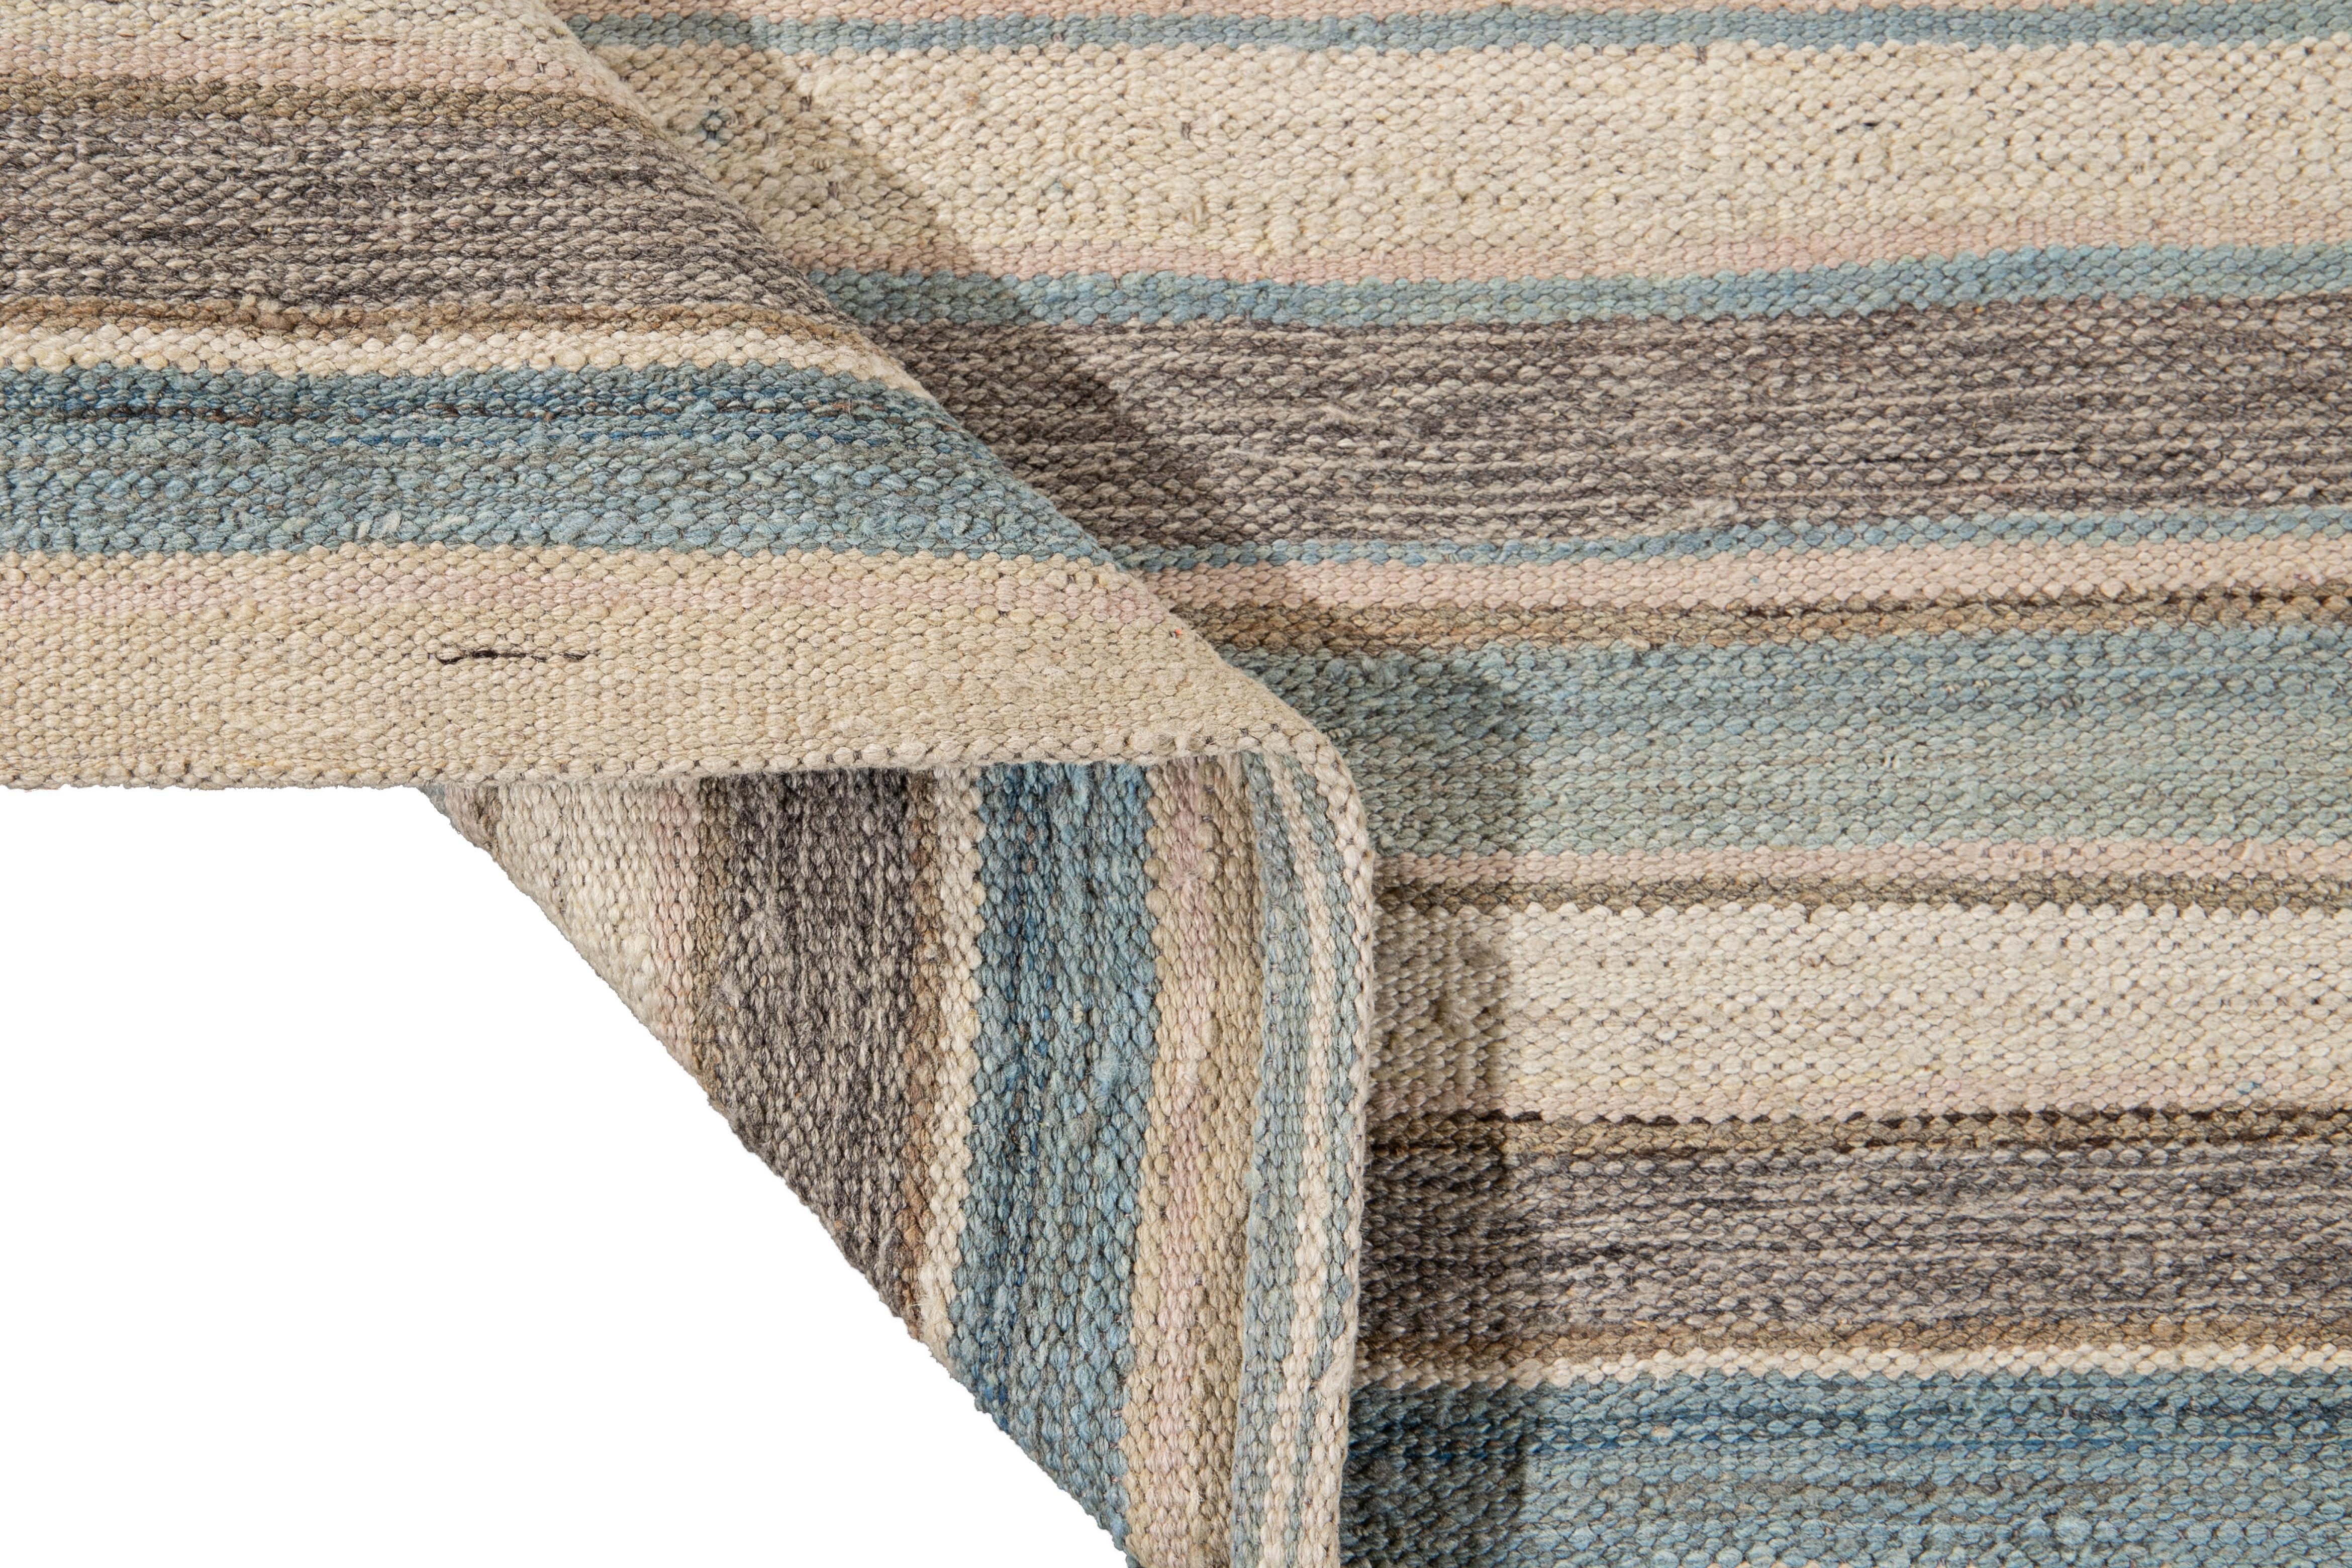 Beautiful modern flat-weave Kilim hand knotted wool rug. This rug has a field of beige, blue, and brown color in a gorgeous all-over geometric stripe design.

This rug measures 8'6